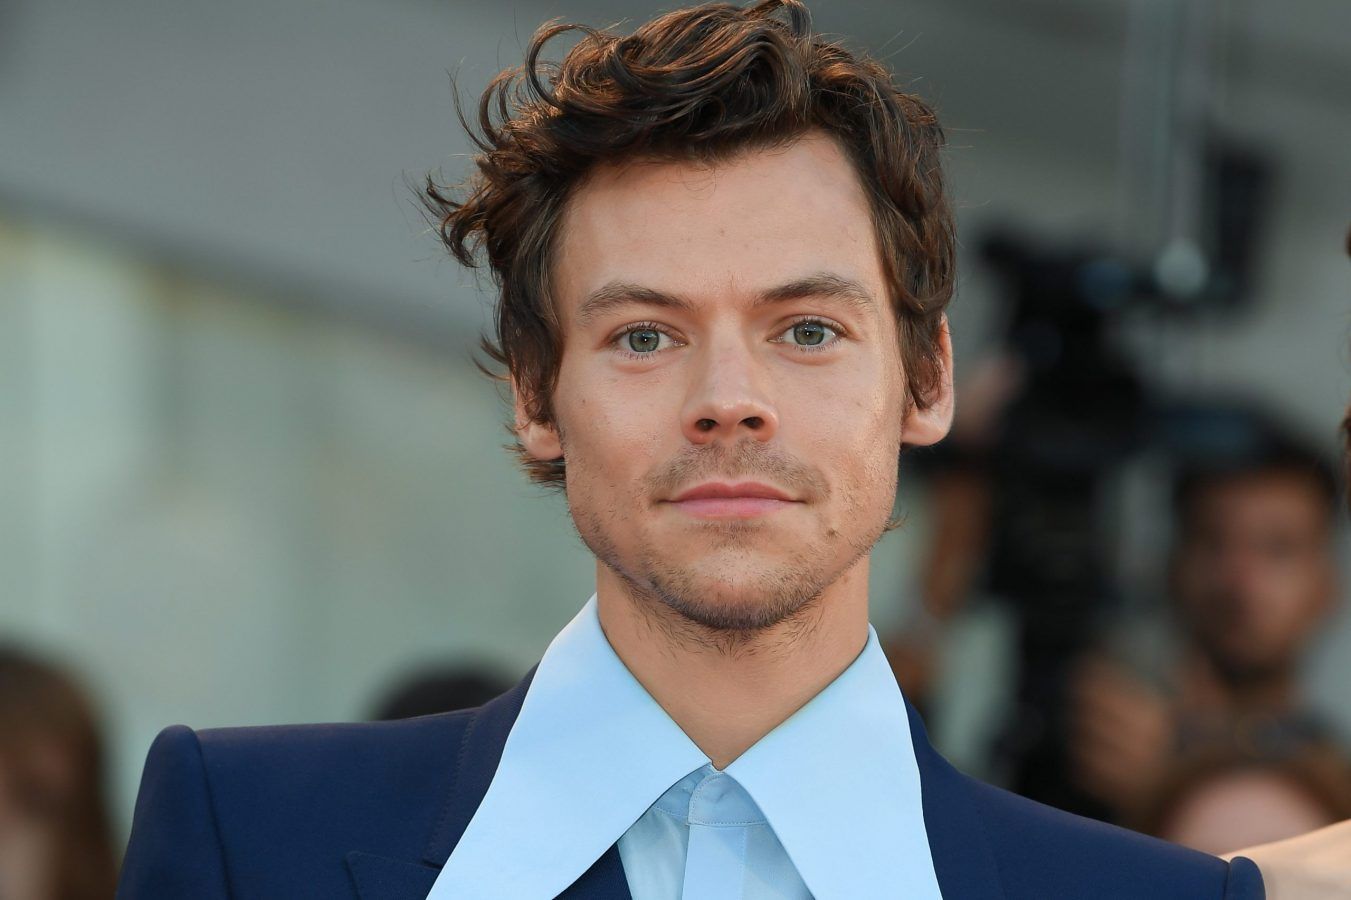 ‘Don’t Worry Darling’ star Harry Styles dazzles the red carpet in Venice